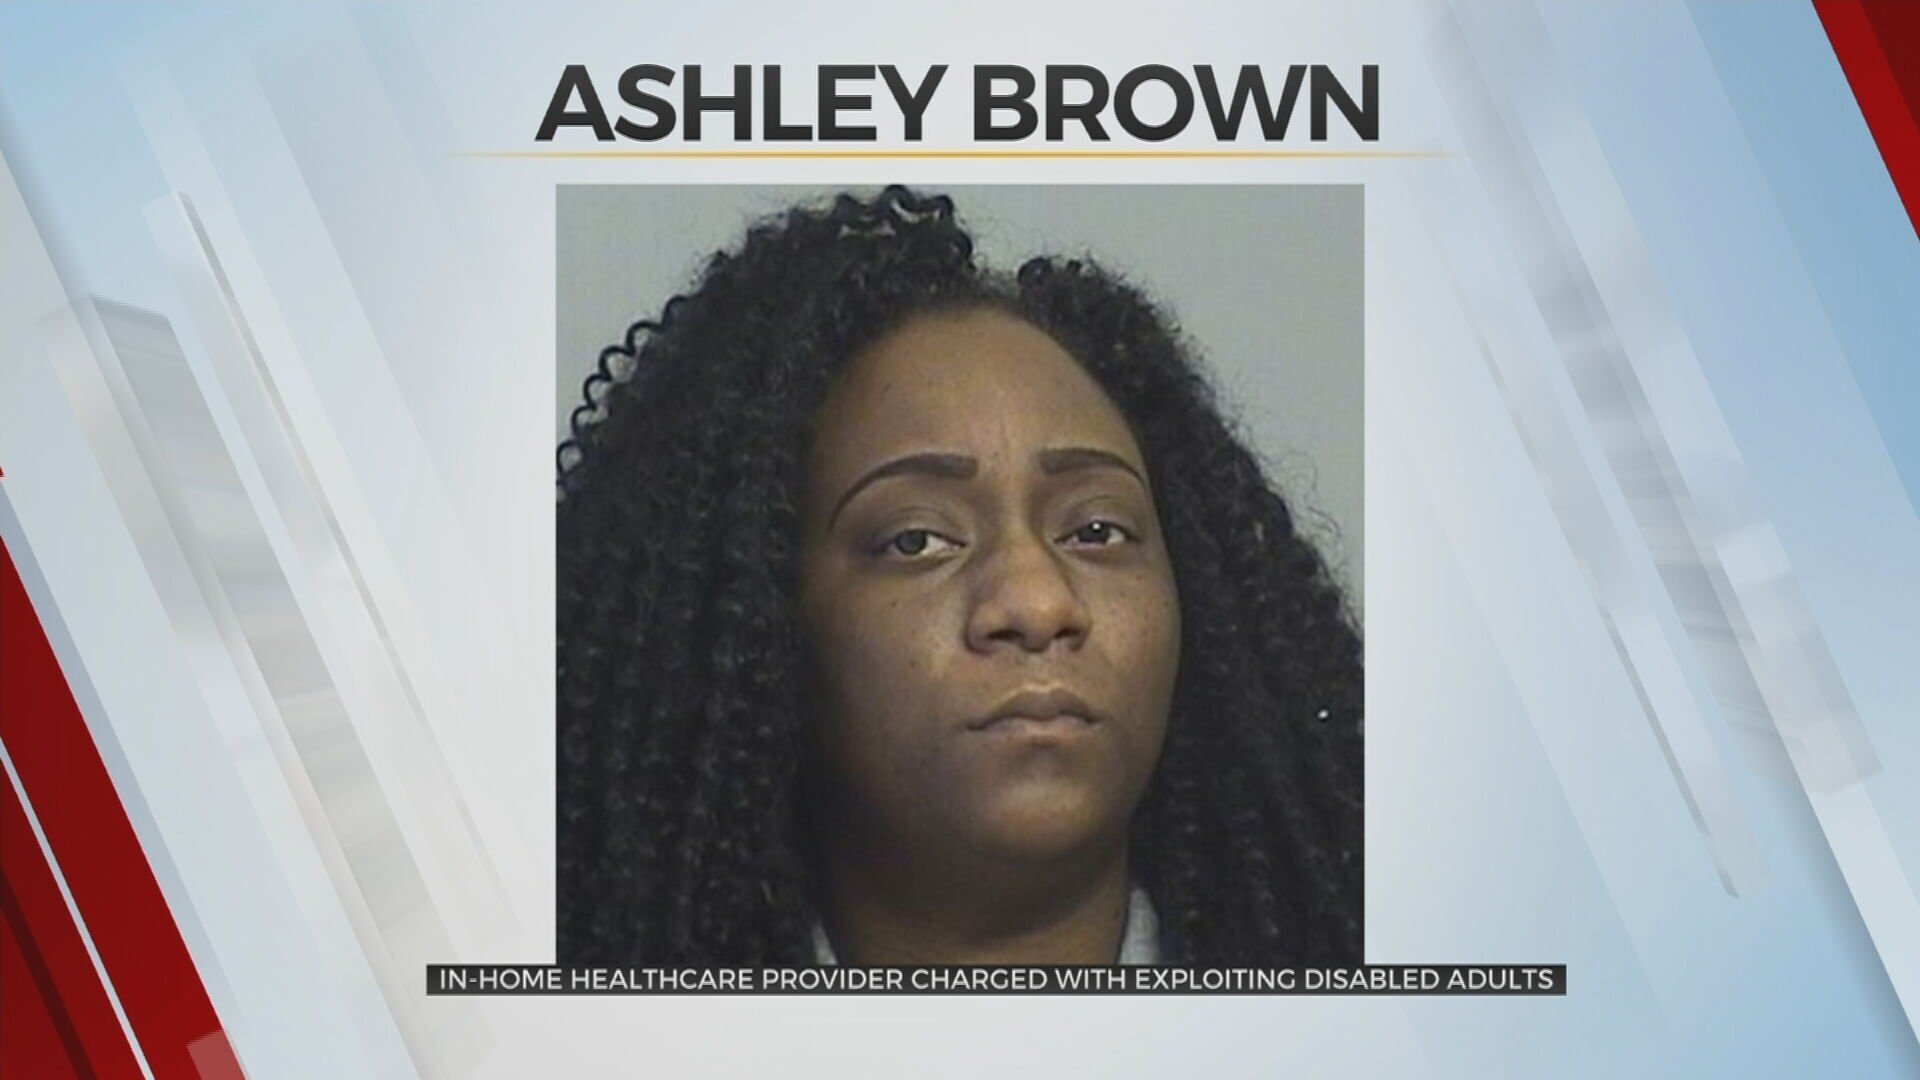 Broken Arrow Caretaker Charged For 4th Time, Accused Of Exploiting Disabled Adults 